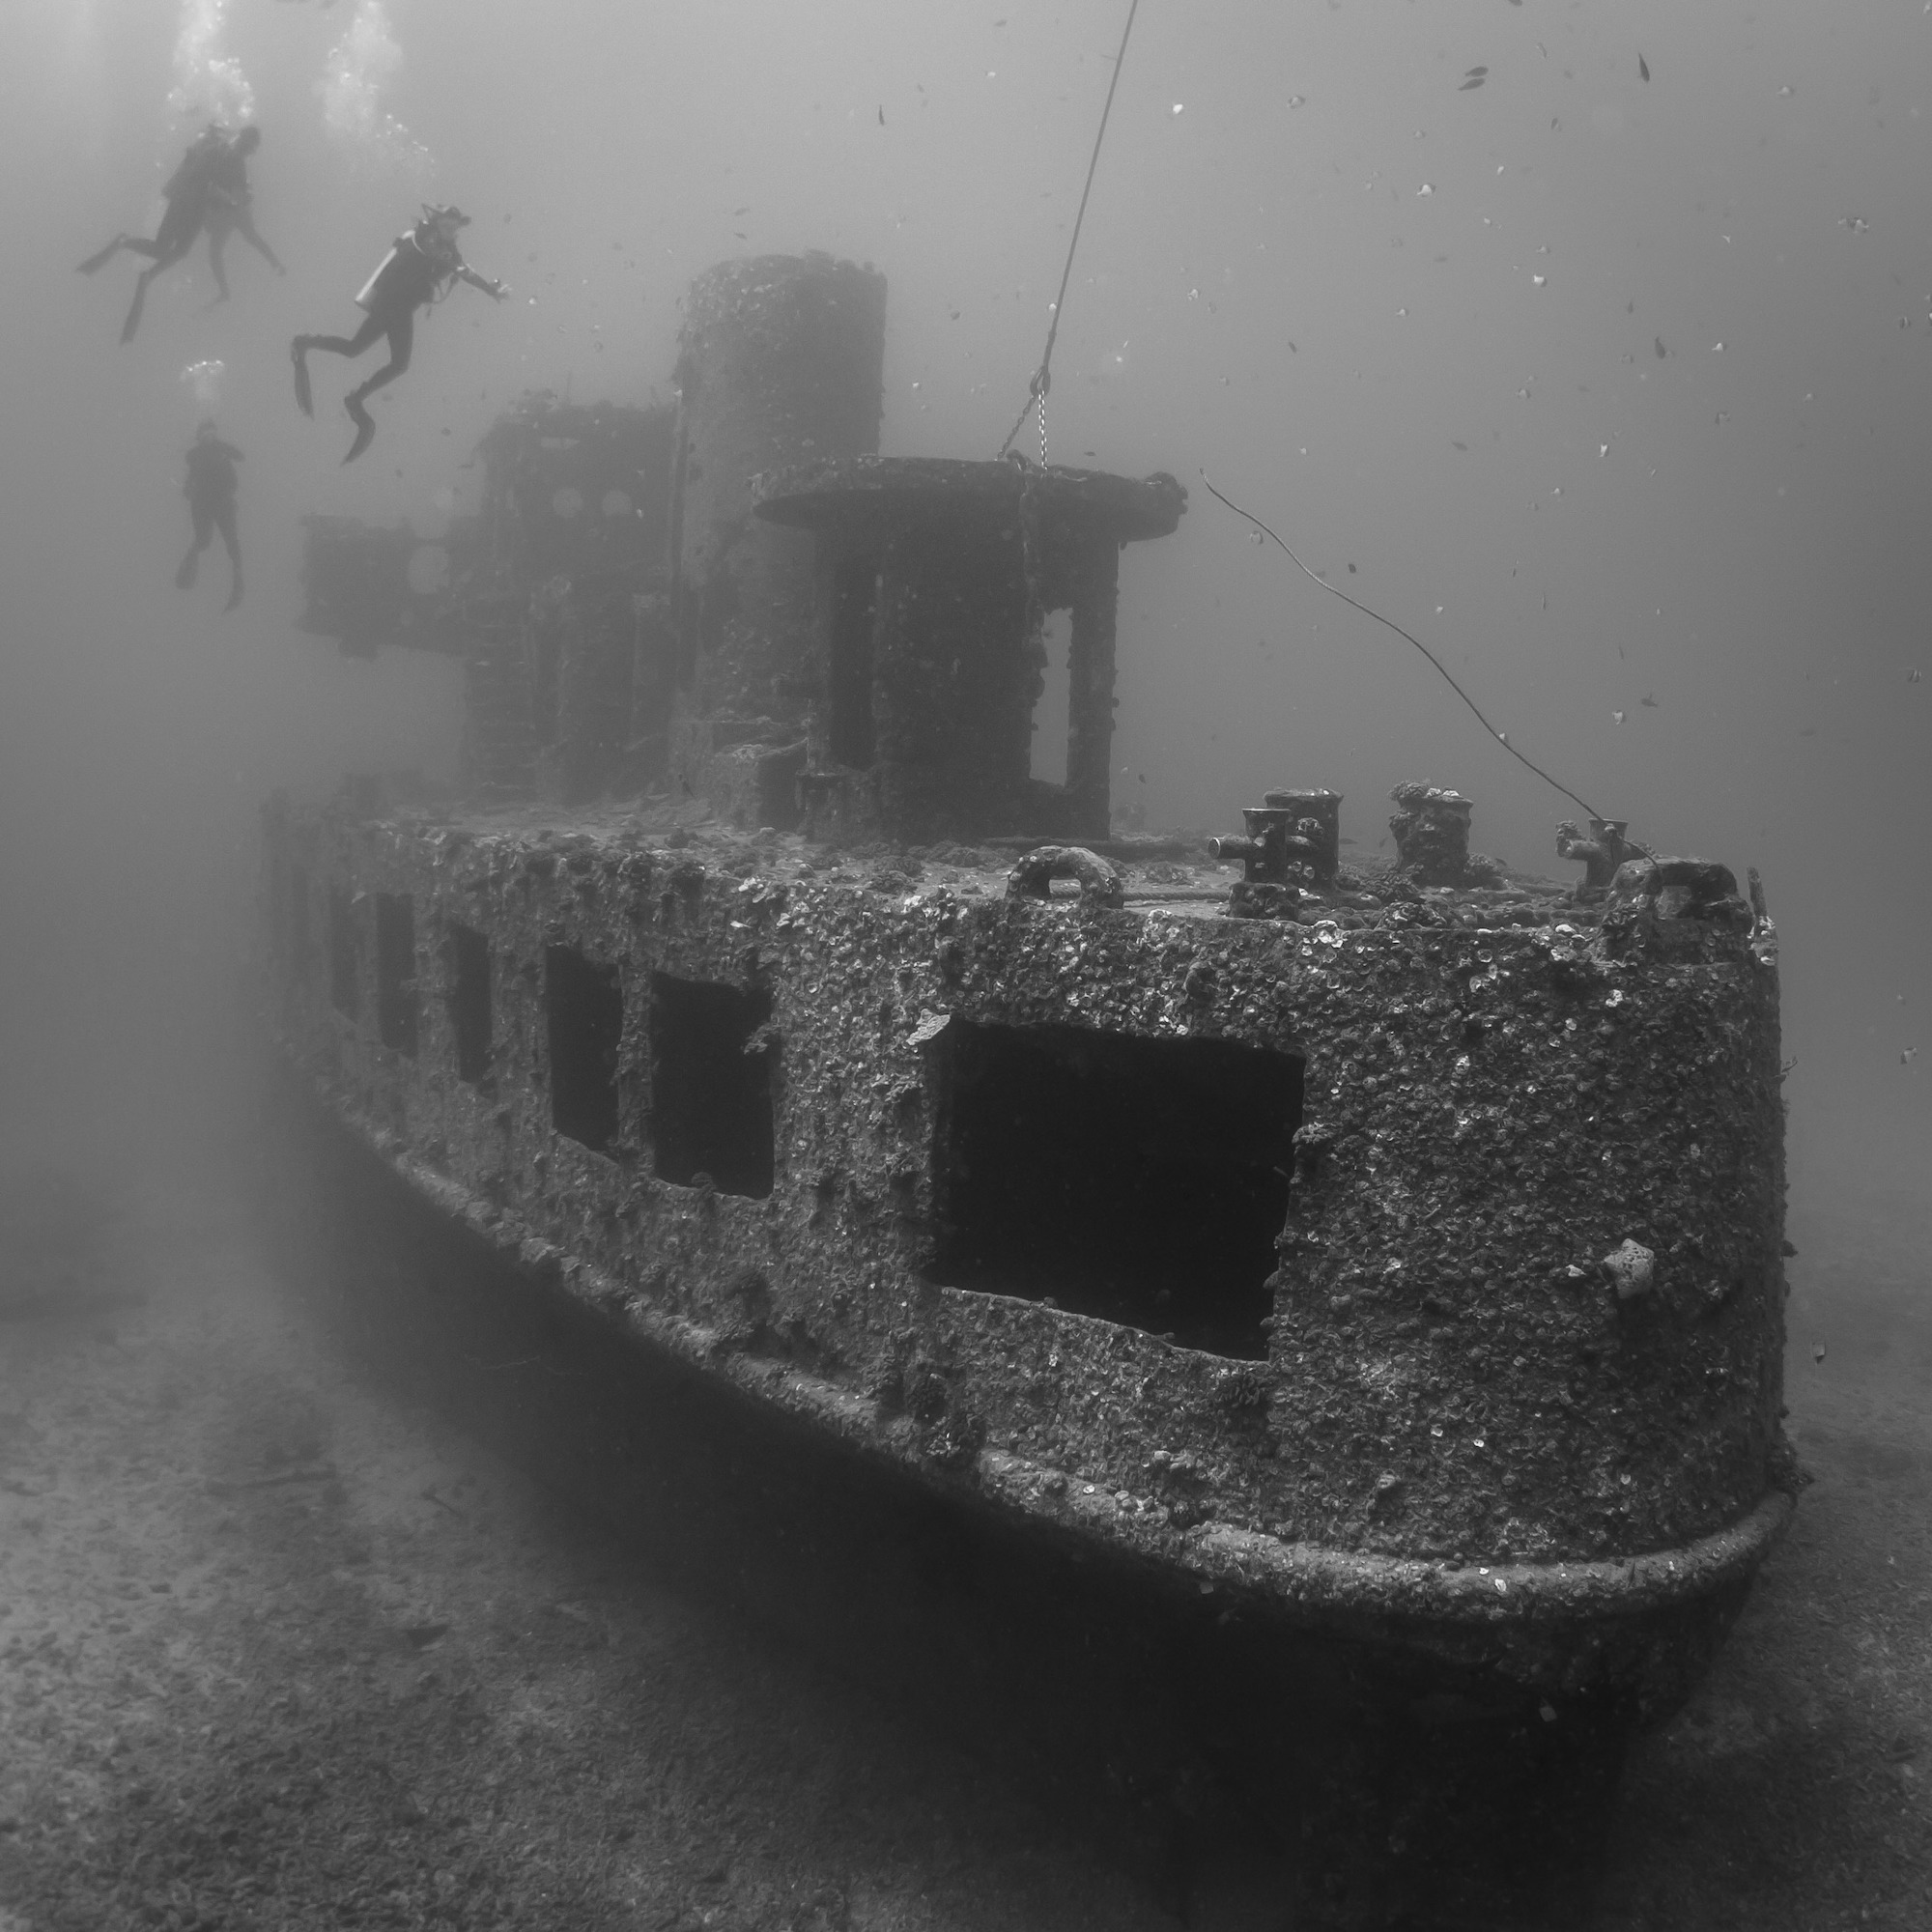 Scuba divers hovering above the YO-257 wreck near Waikiki City, which is one of the most popular Oahu diving destinations